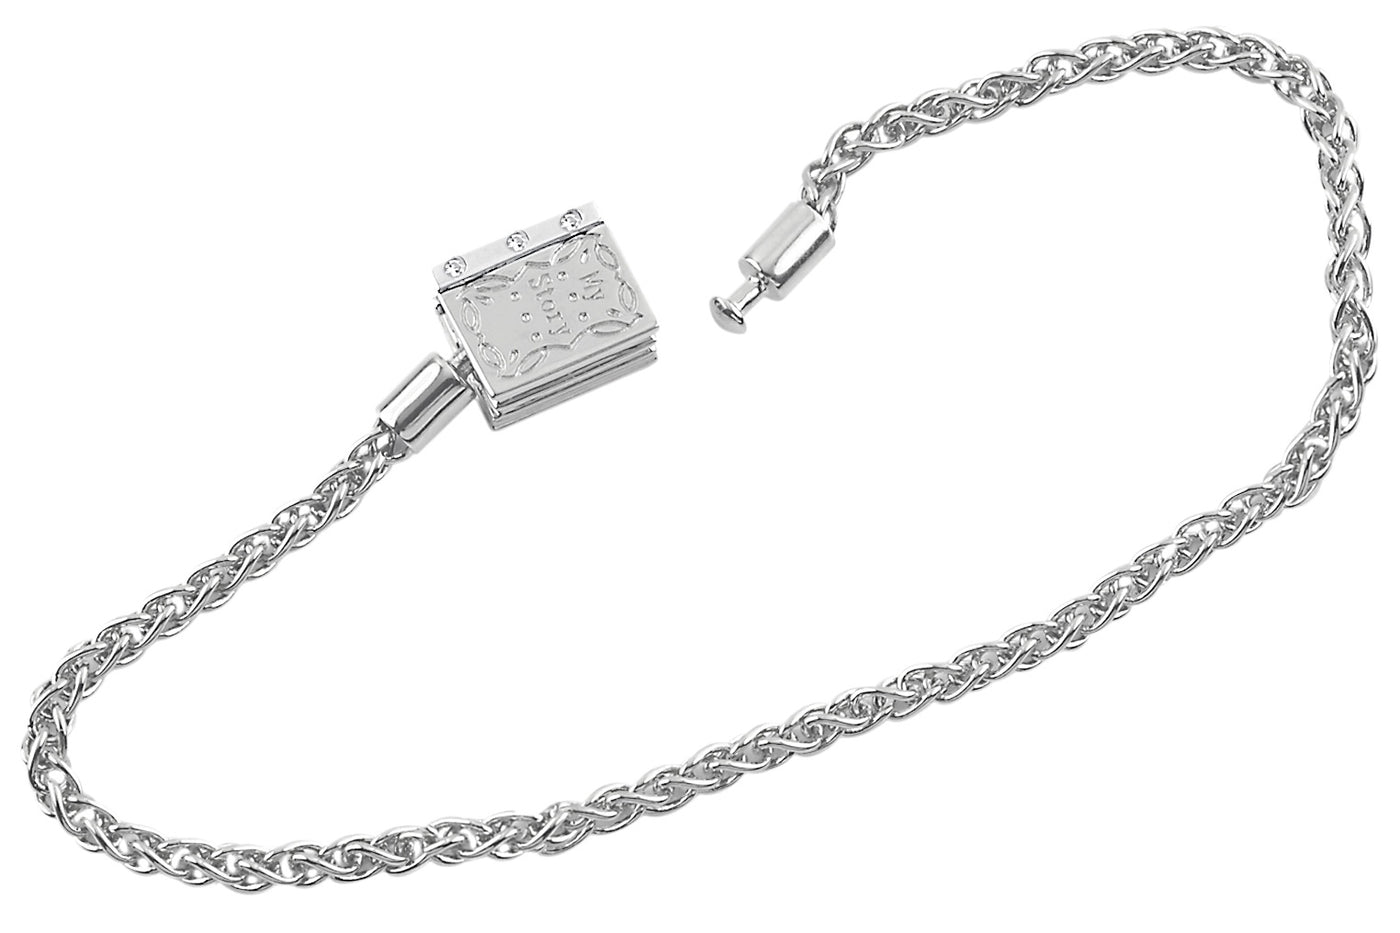 8 8" Bracelet WG - 14K White Gold W/O Stopper Beads and Storywheel Book Clasp with Diamonds